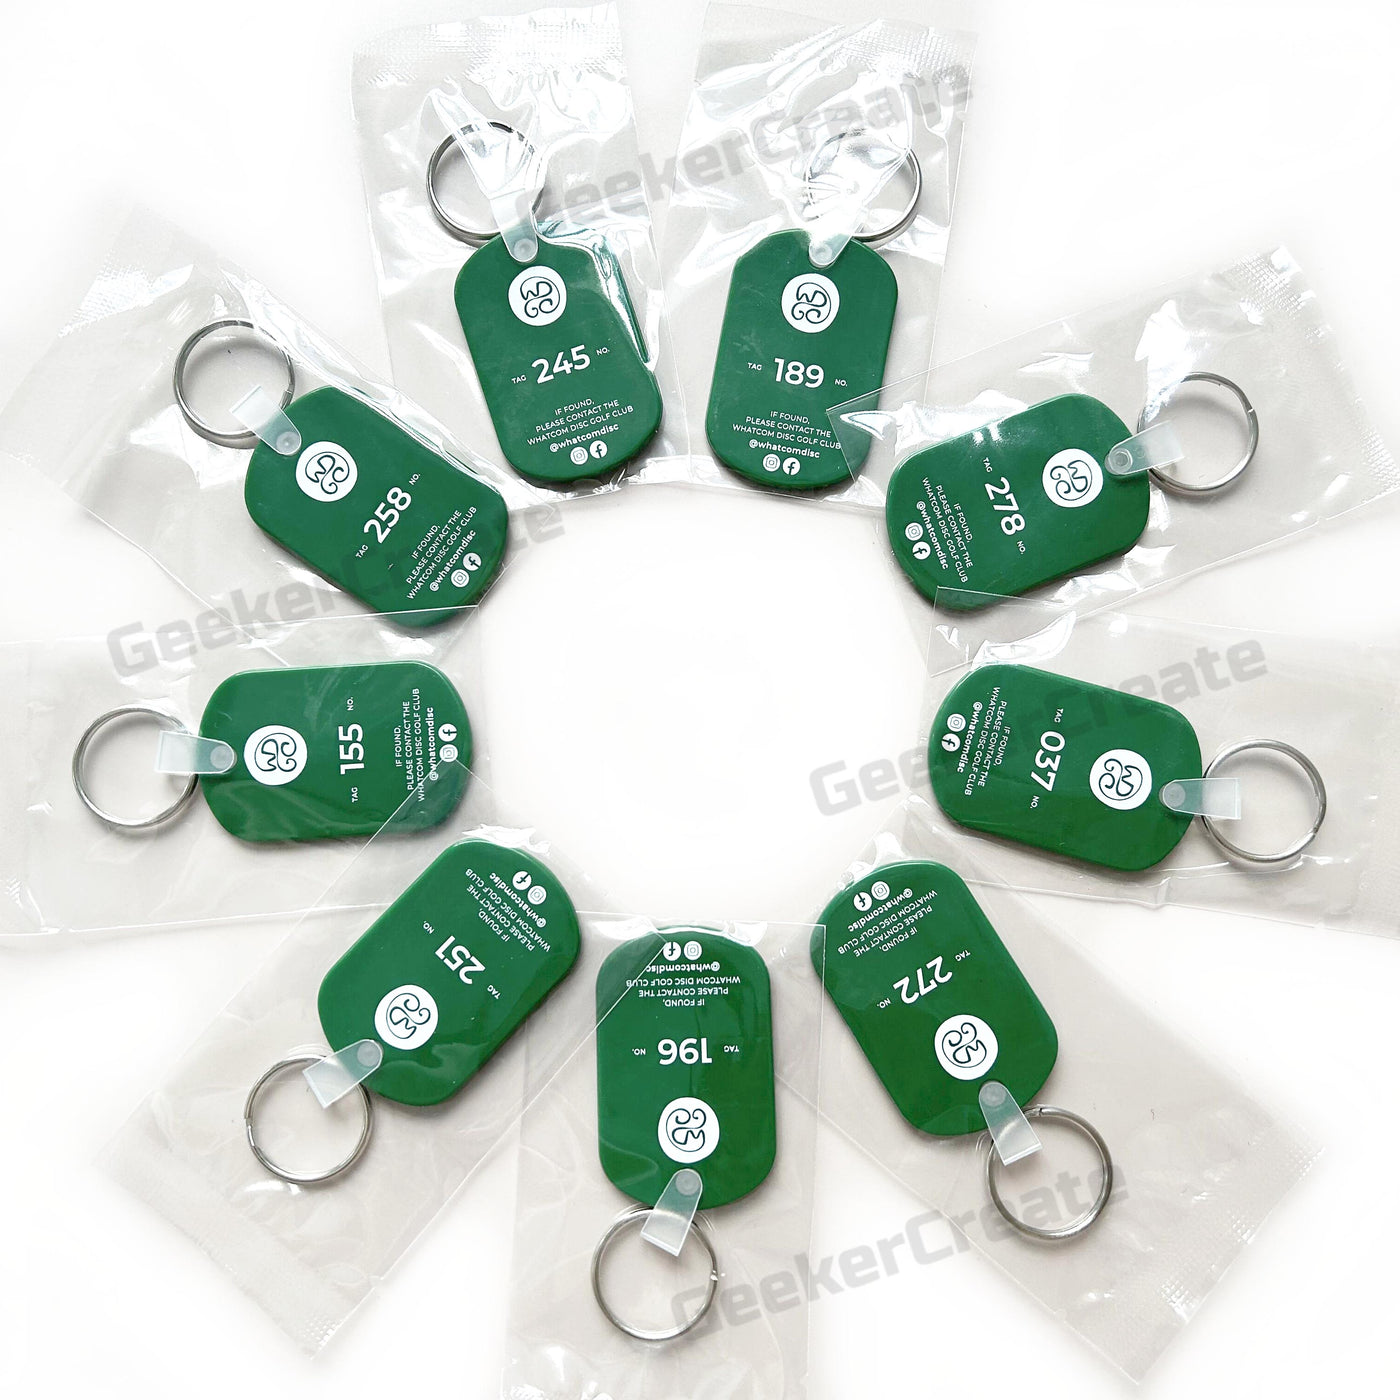 100pcs Custom Logo Printing Soft PVC Keychains Plastic Key tag For Business Giveaway Gifts